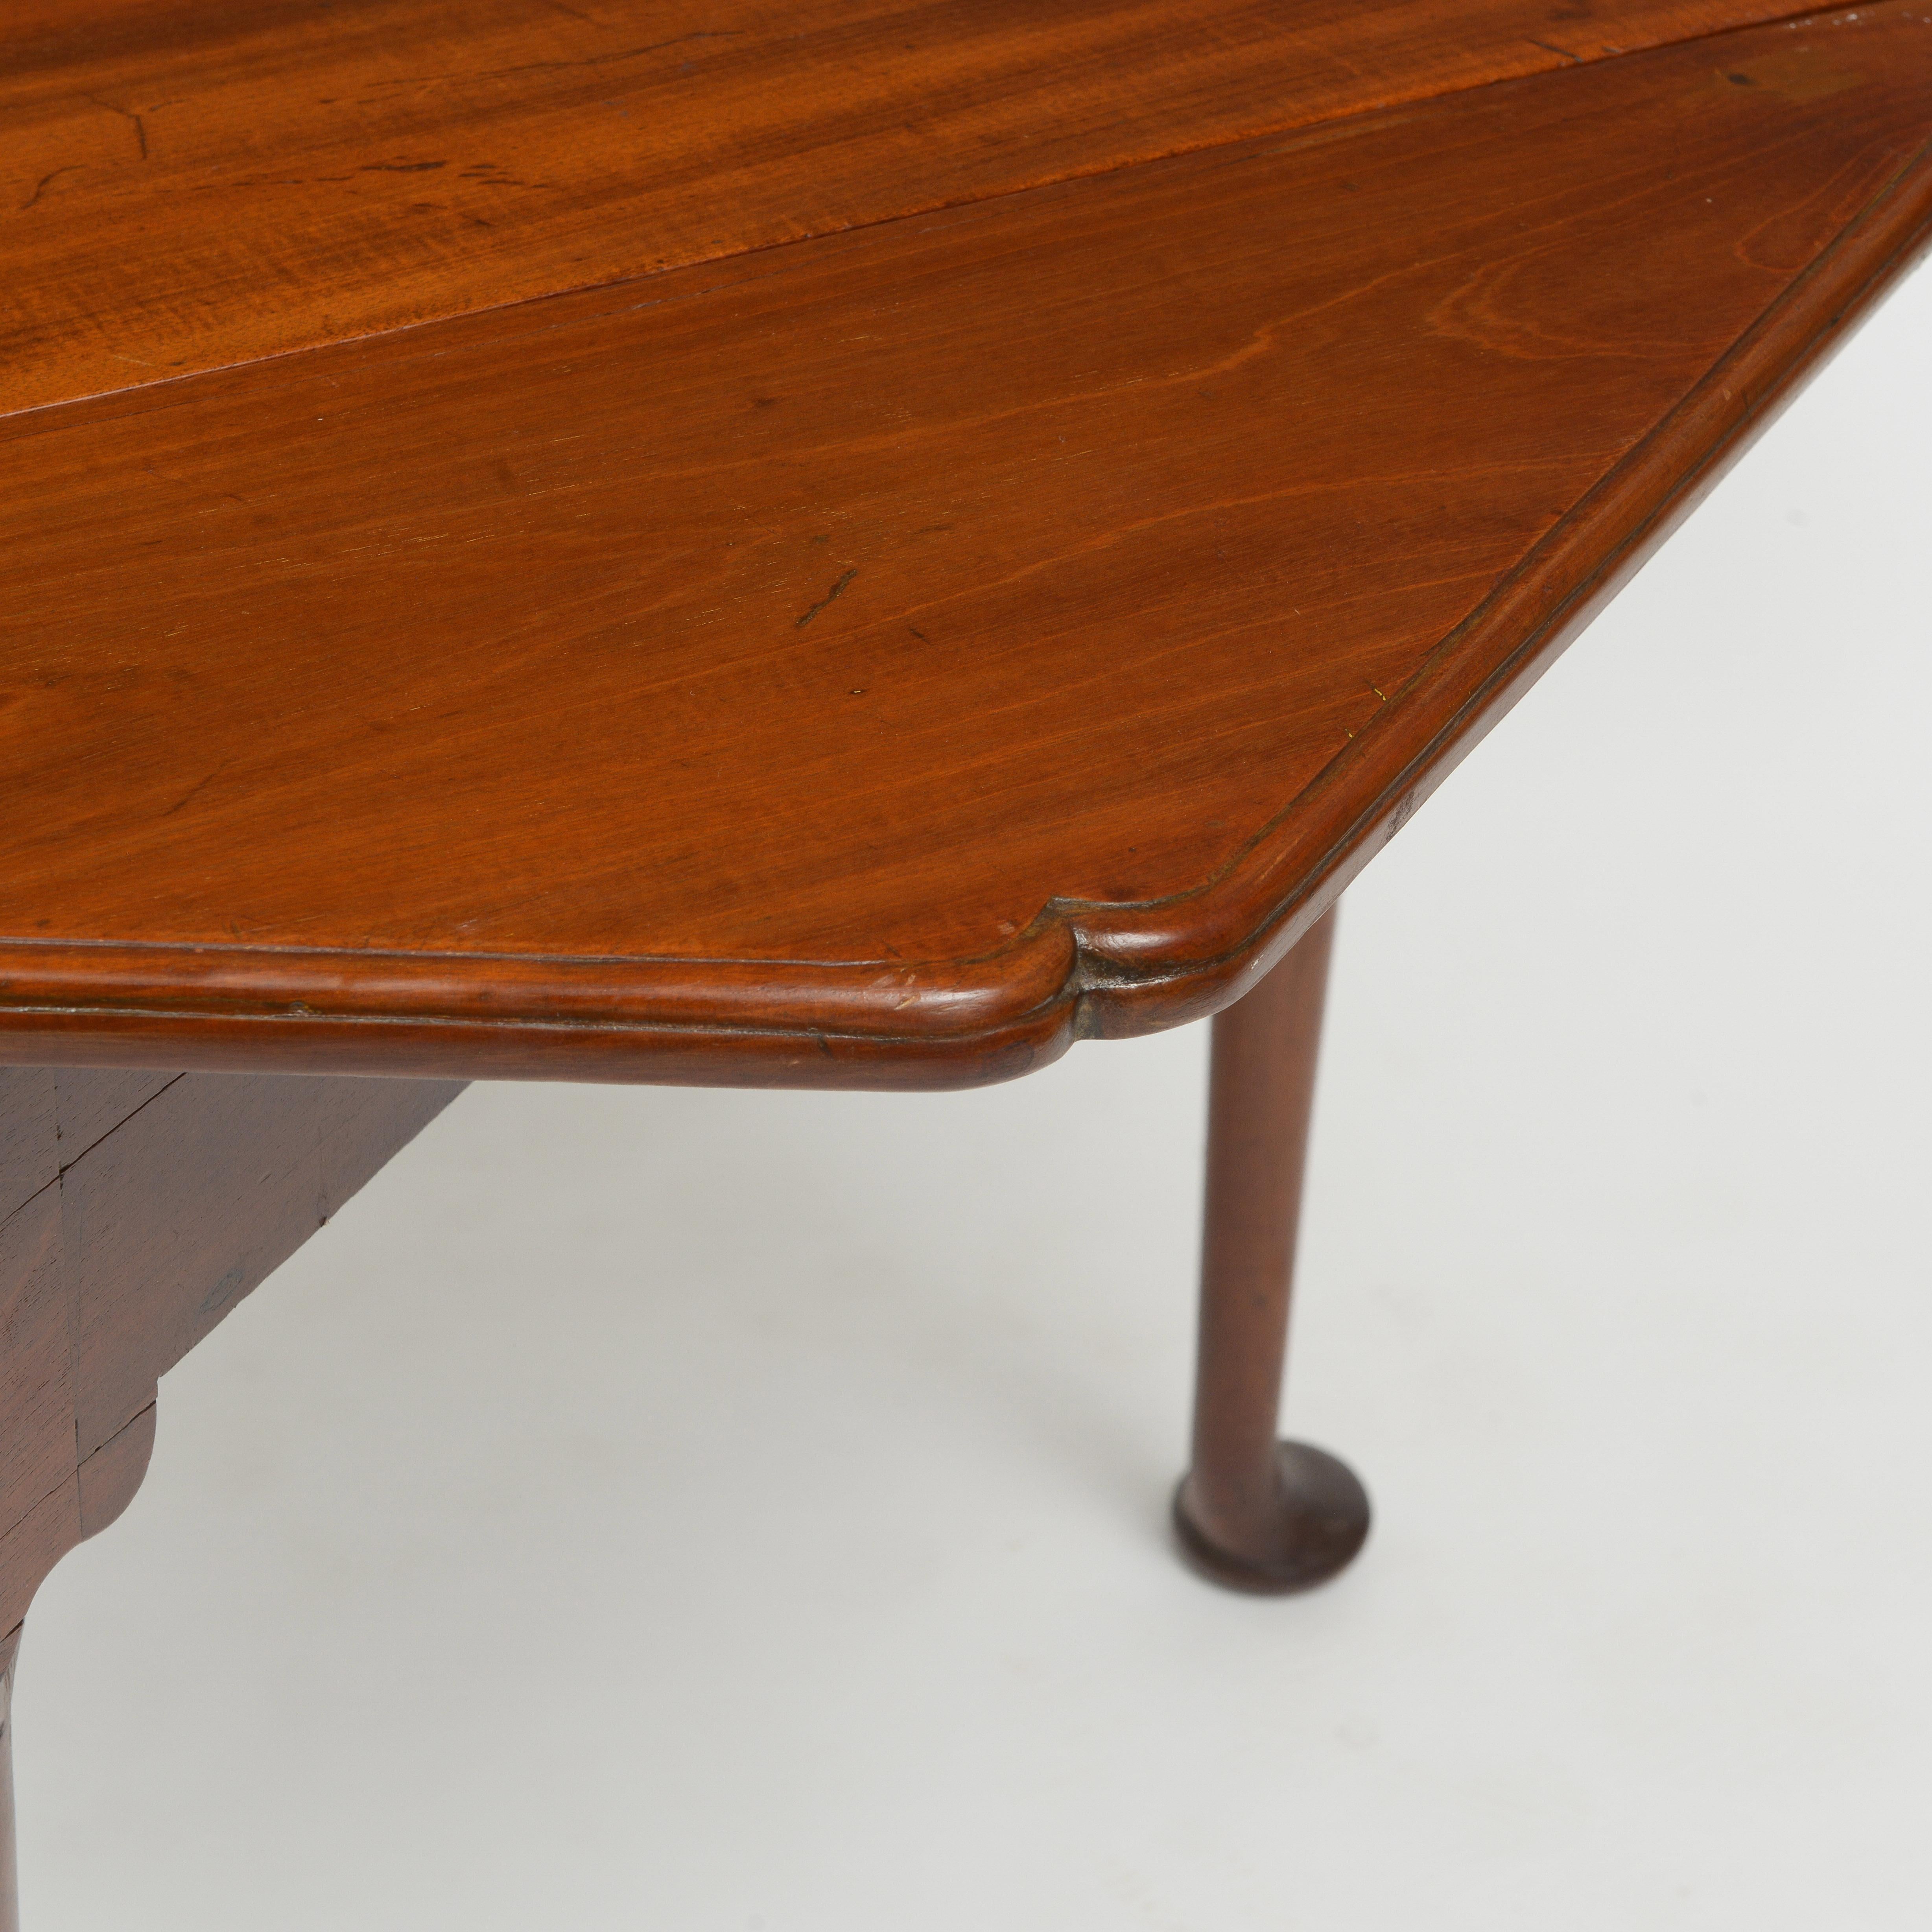 Early 18th Century Mahogany Envelope Table In Good Condition For Sale In Brooklyn, NY